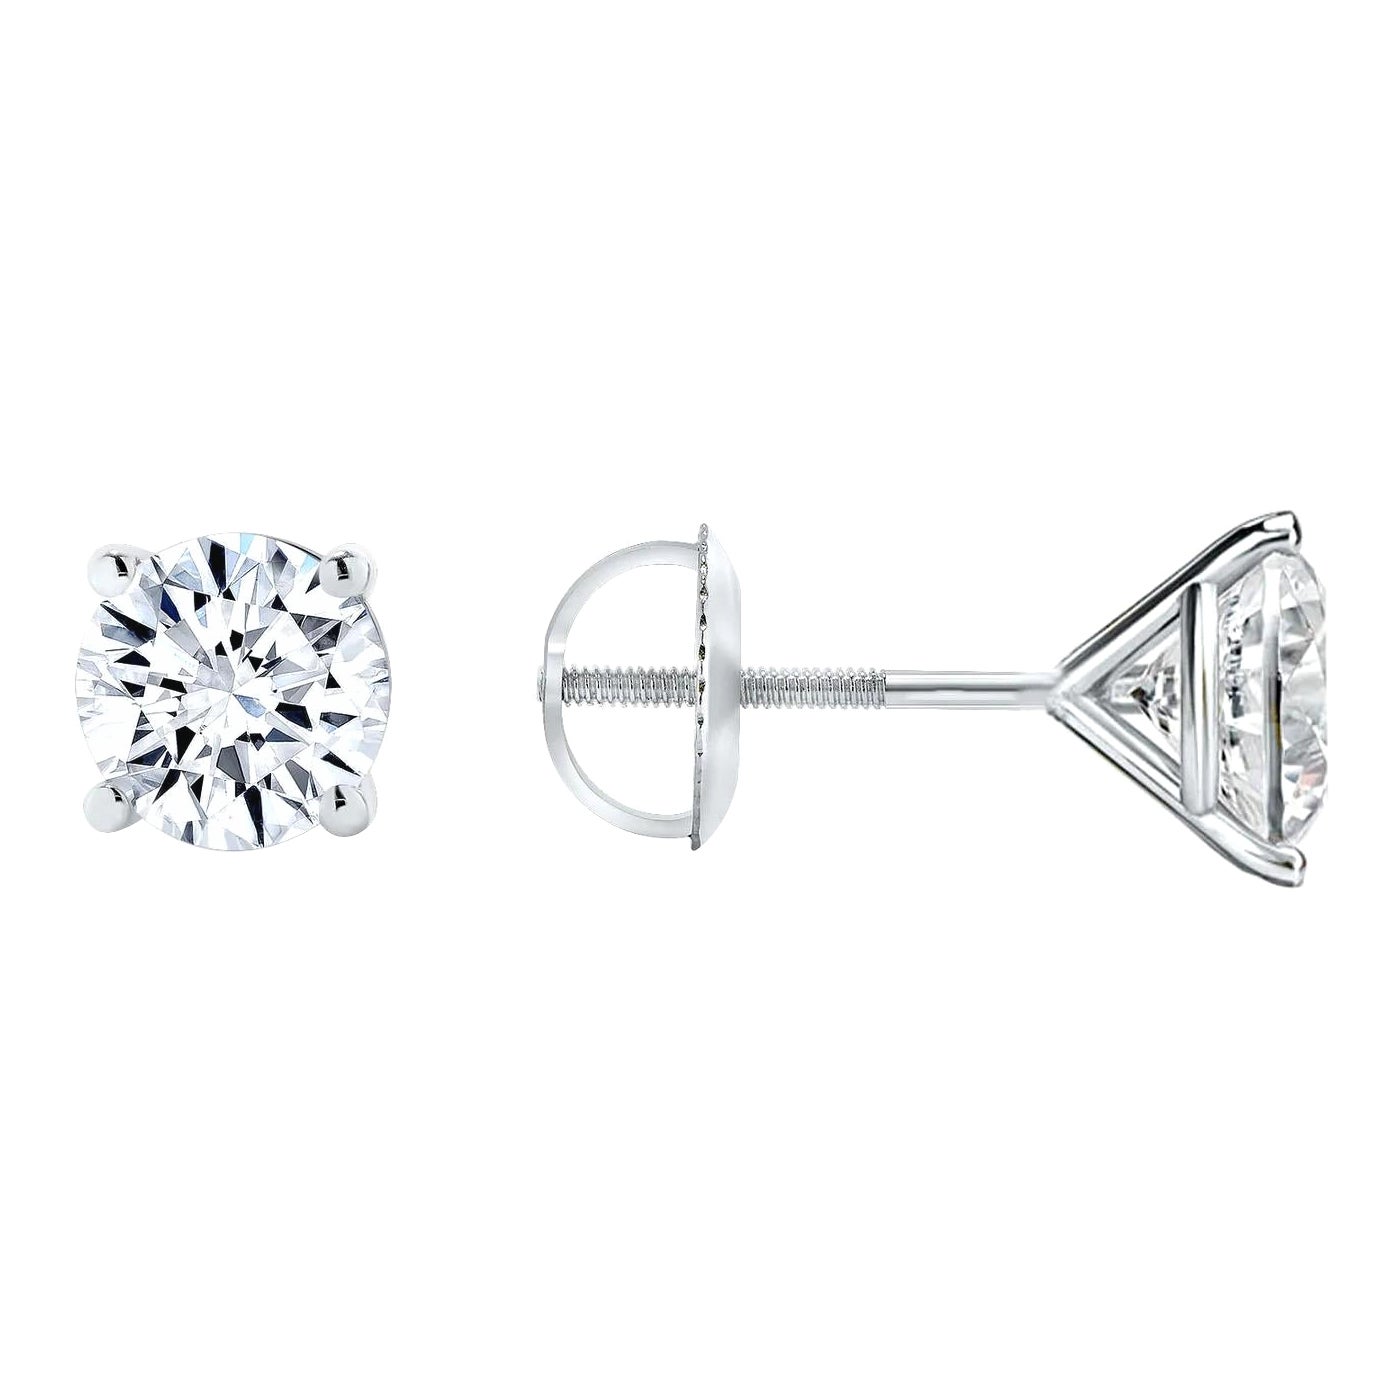 These beautifully matched diamond stud earrings feature round diamonds set in a 14k gold settings.

Earring Information
Setting : 4 Prong Screw Back Martini Setting 
Metal : 14k Gold
Diamond Carat Weight : 0.50ttcw
Diamond Cut : Round Natural